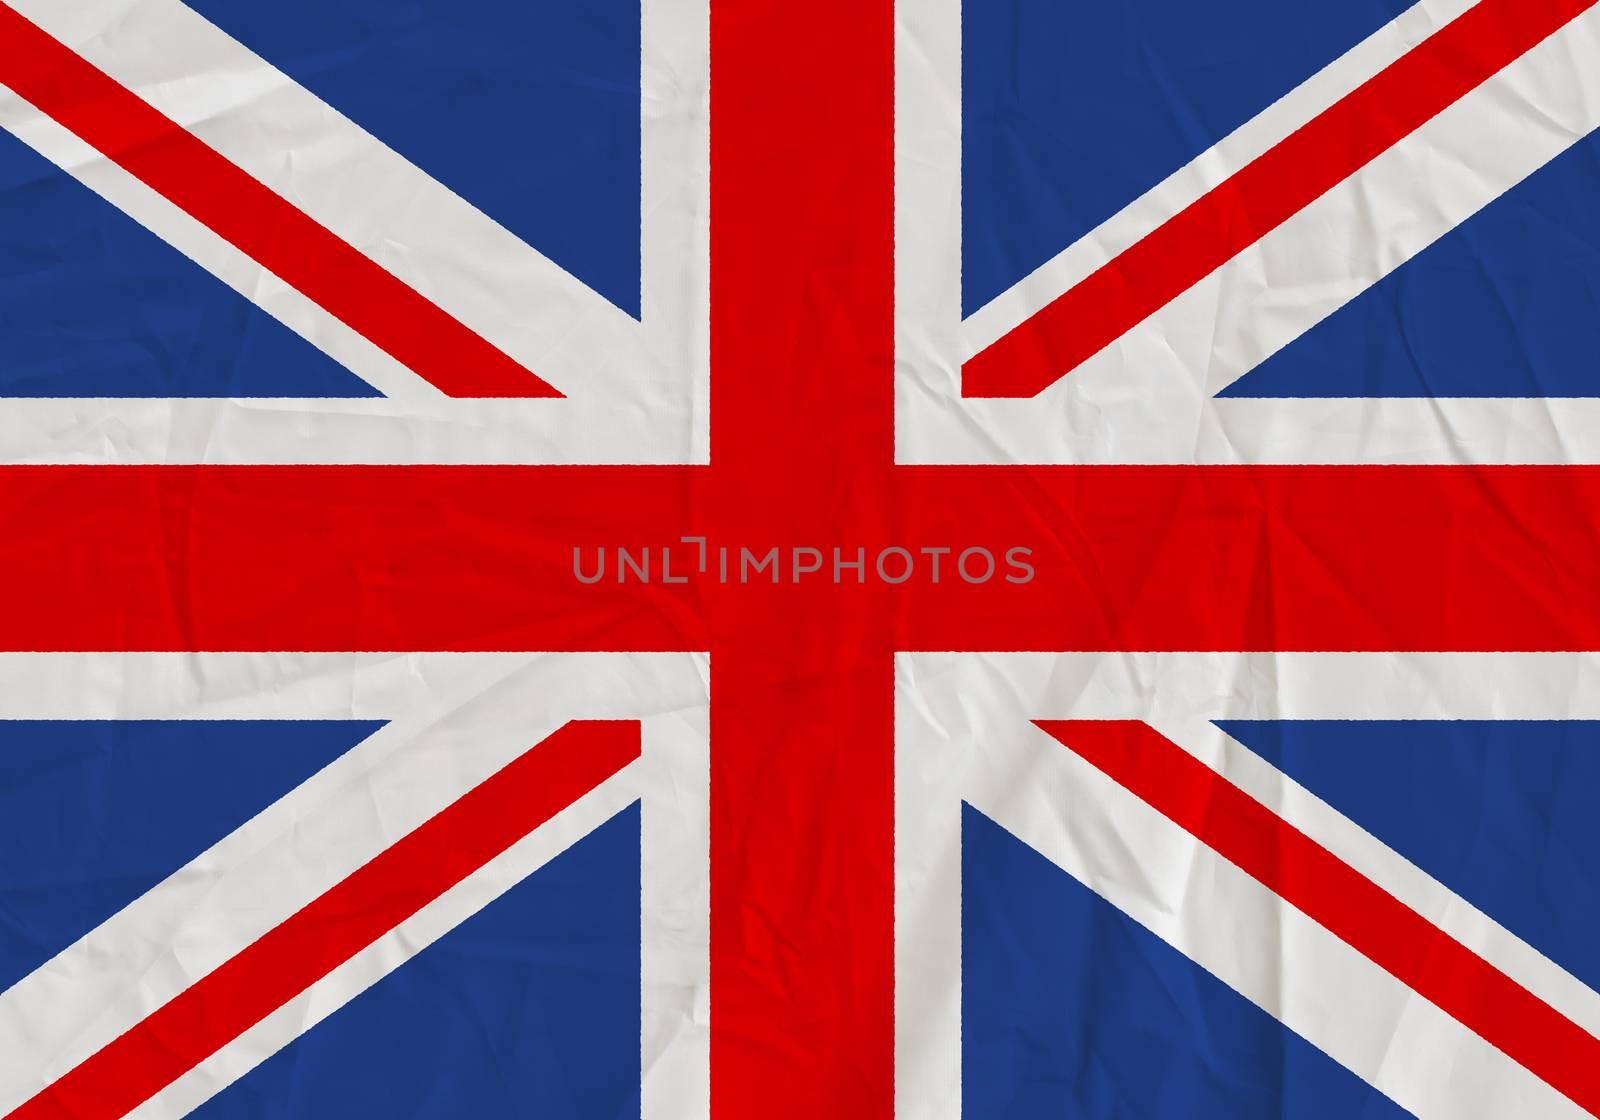 United Kingdom grunge flag by Visual-Content